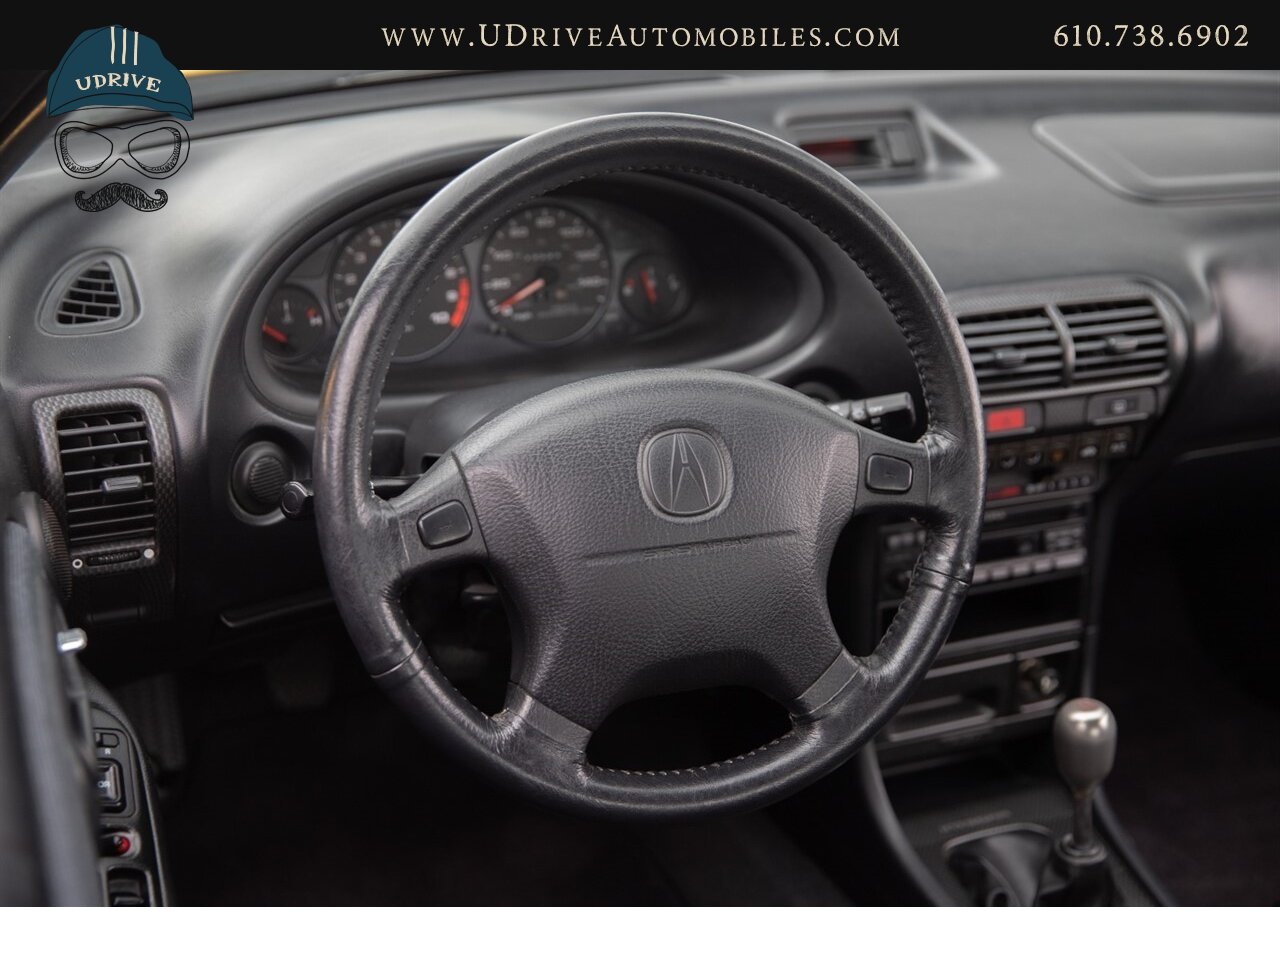 2001 Acura Integra Type R  38k Miles 2 Owners - Photo 32 - West Chester, PA 19382